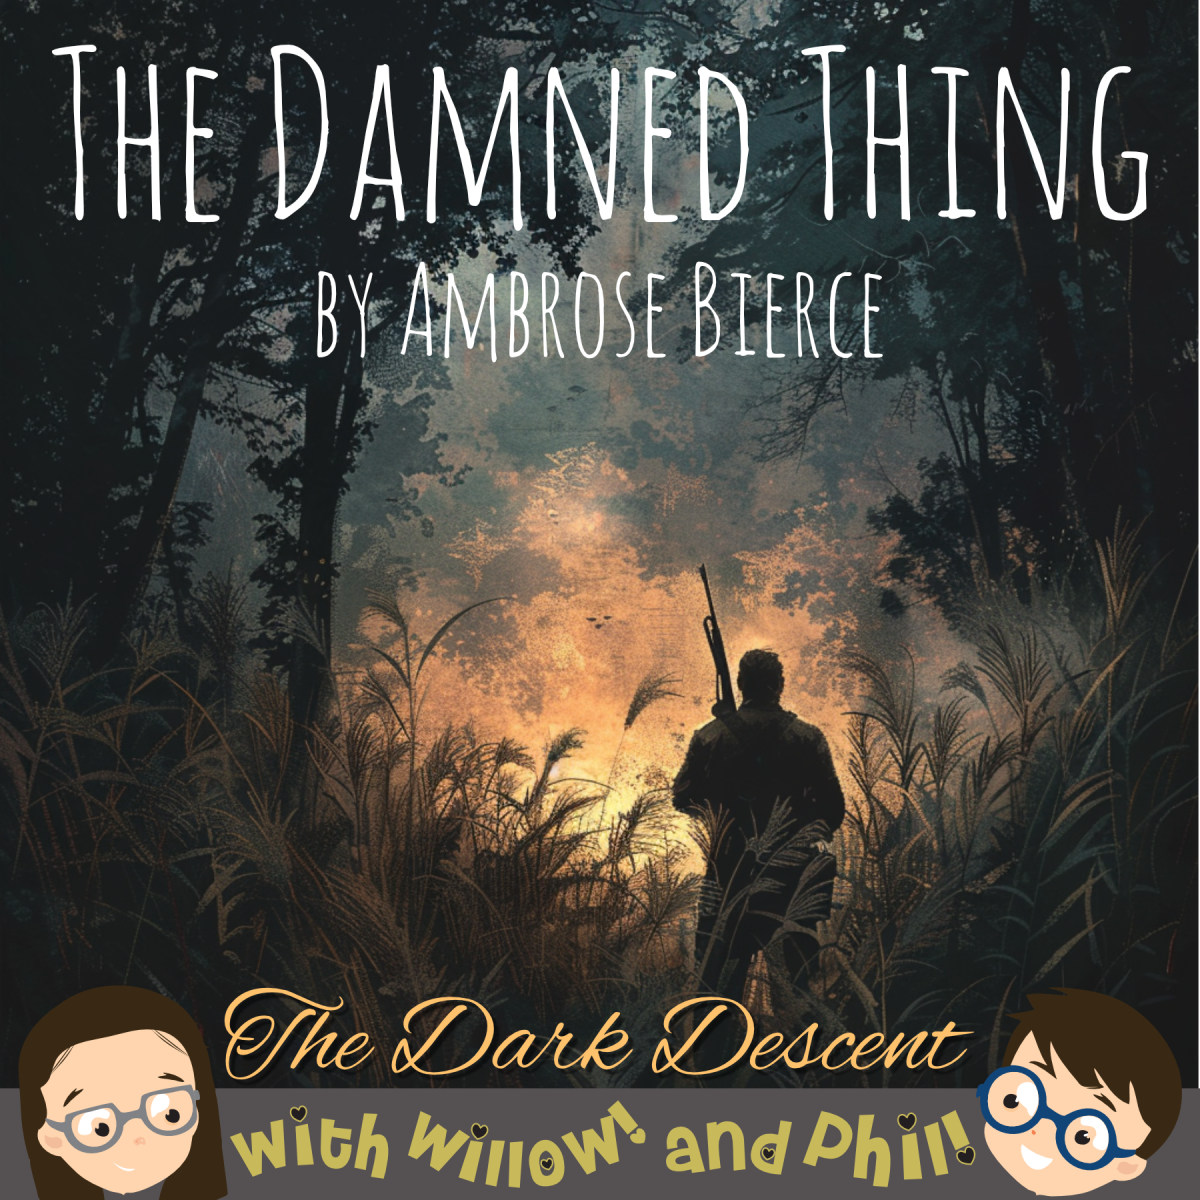 The Dark Descent – “The Damned Thing” by Ambrose Bierce